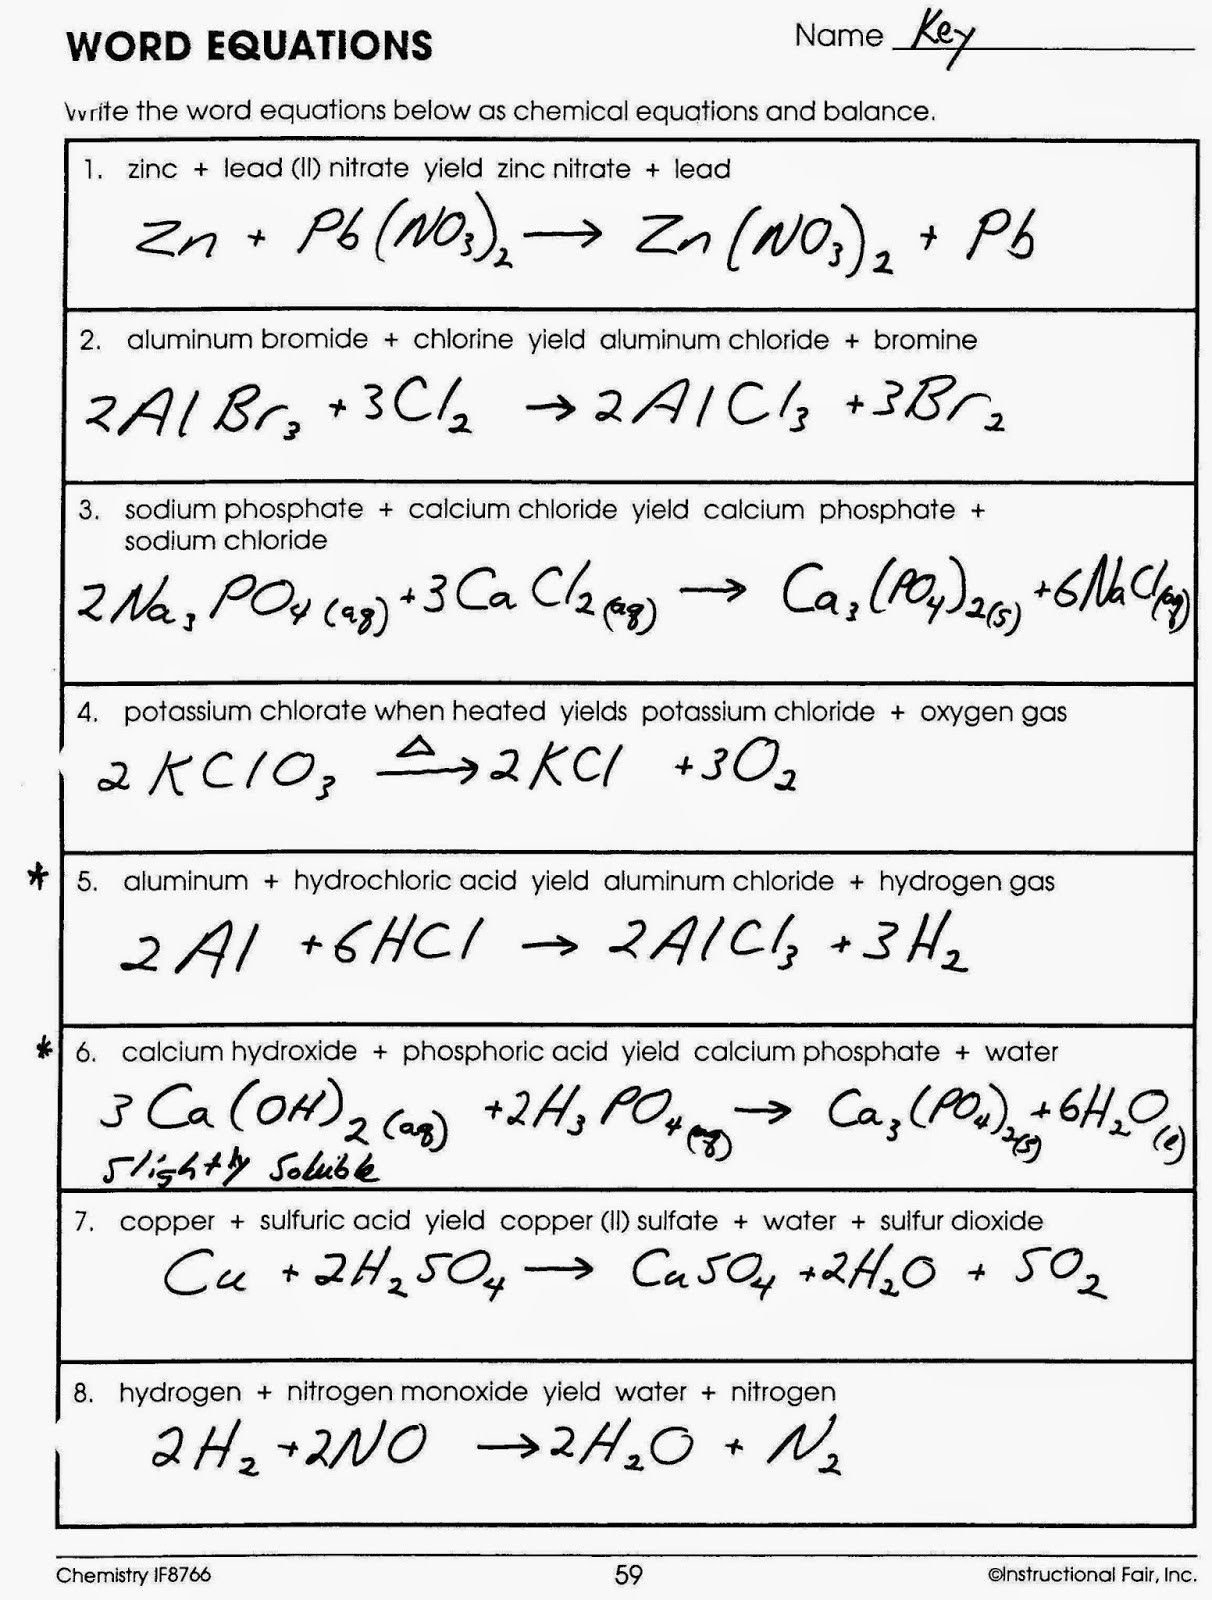 Balancing Chemical Equations Worksheet 1 Answers  Briefencounters Pertaining To Word Equations Chemistry Worksheet